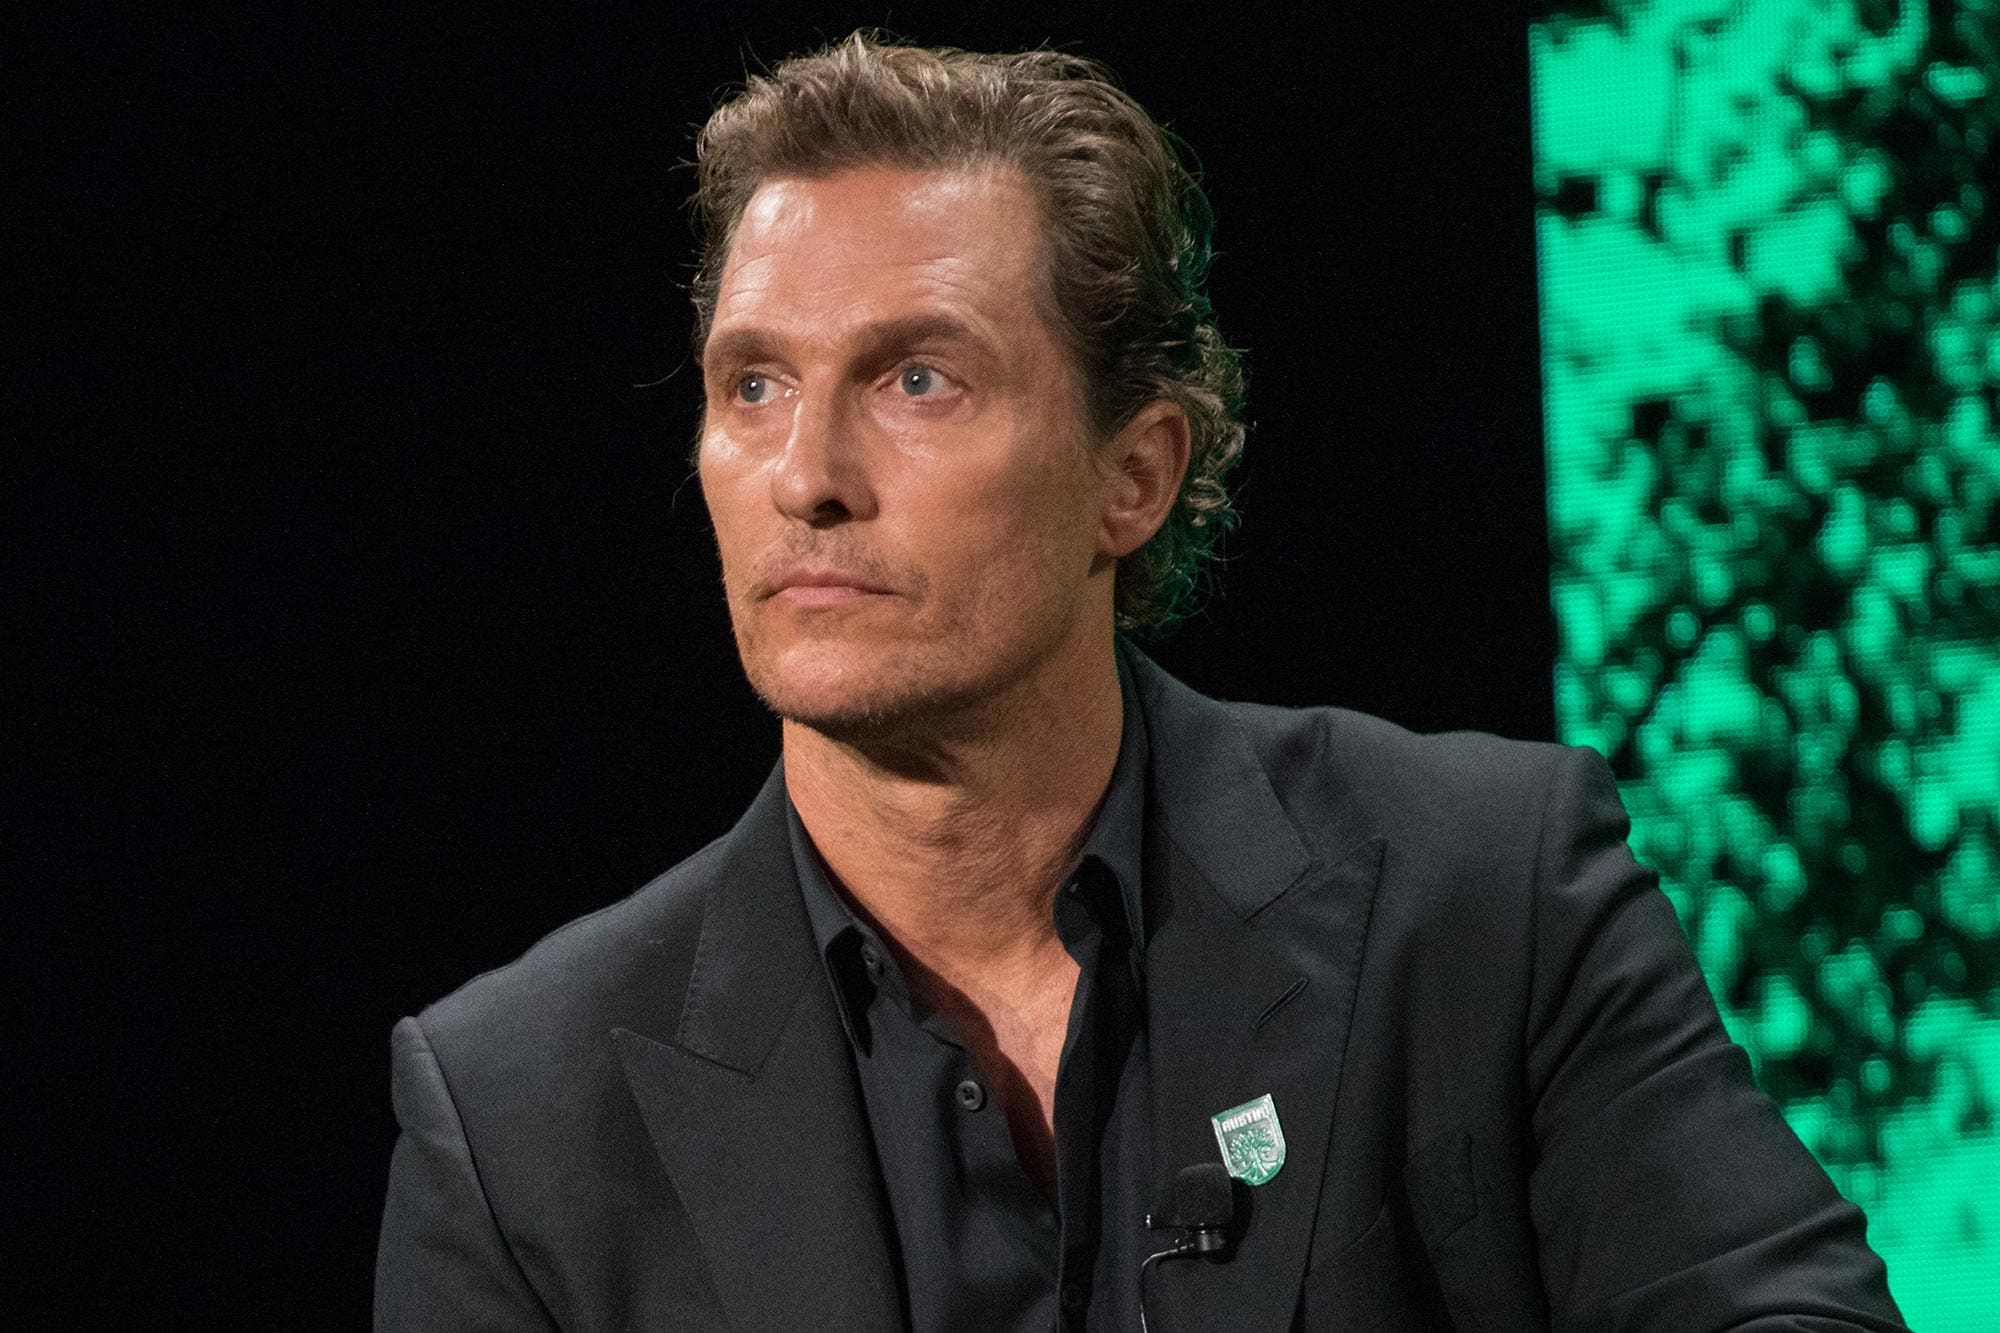 mathew-mcconaughey-speaks-out-against-gun-violence-at-the-white-house